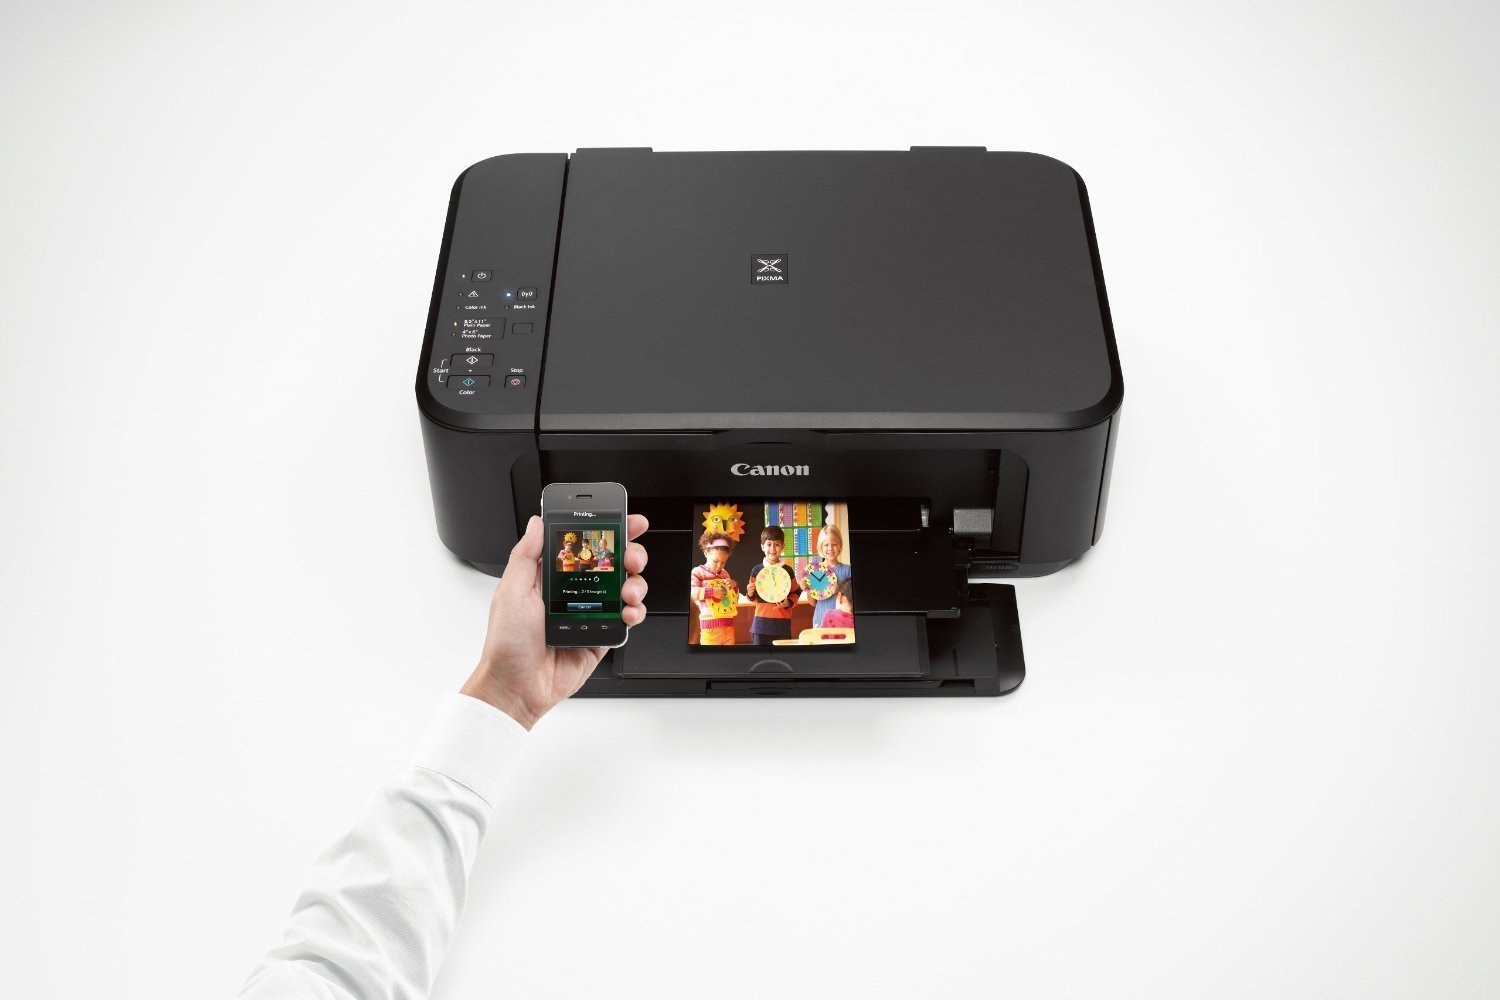 Canon Pixma Mg3520 Wireless All In One Color Inkjet Printercopierscanner Free Image Download 2269